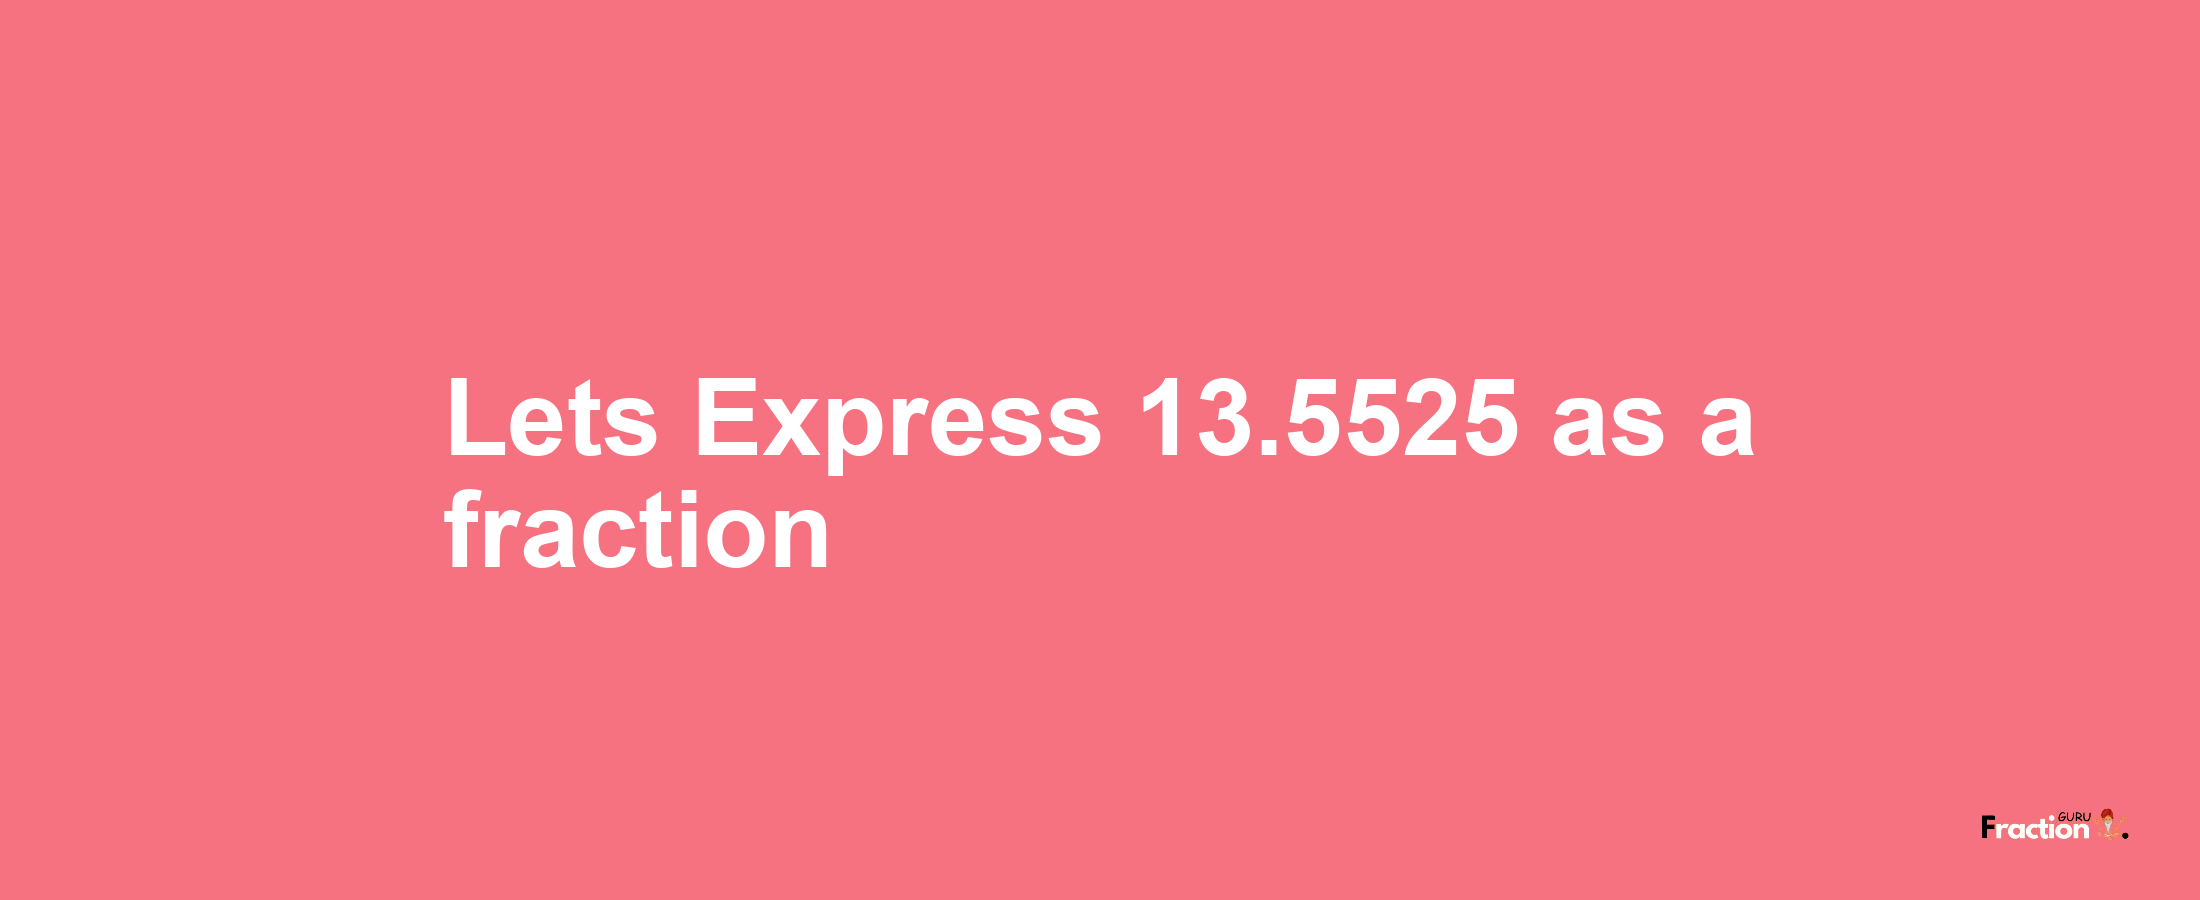 Lets Express 13.5525 as afraction